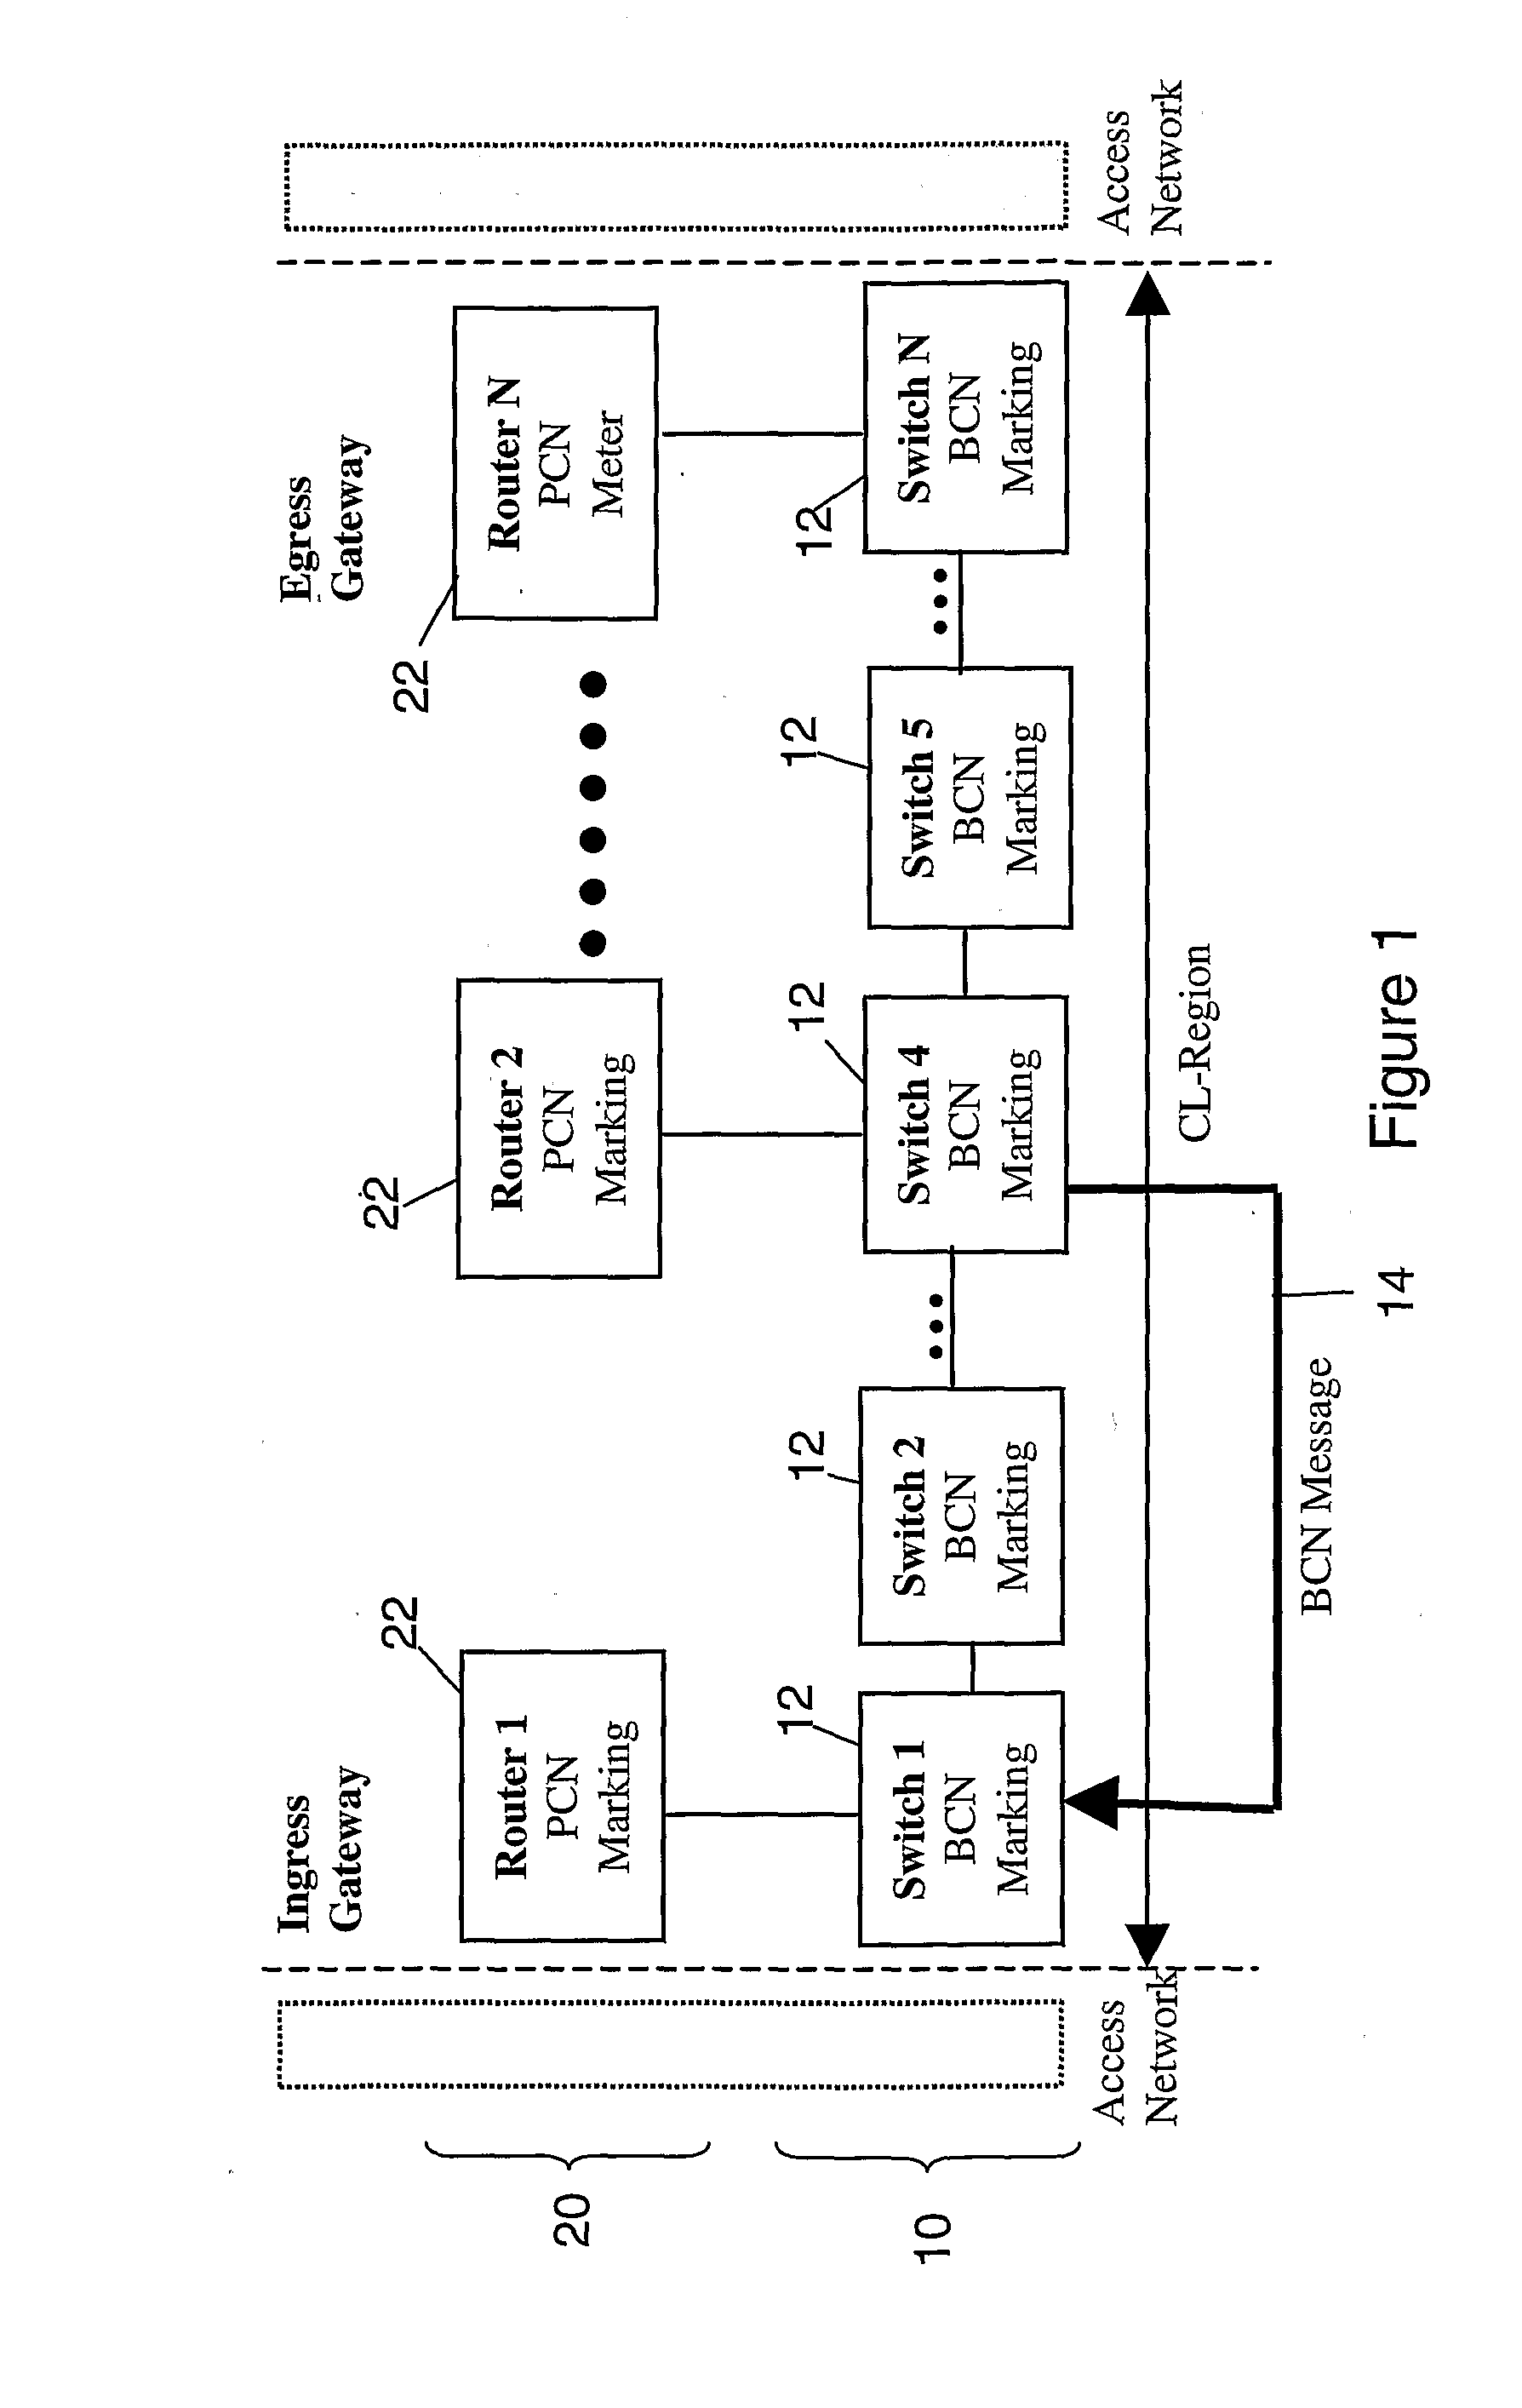 Method and system for congestion marking